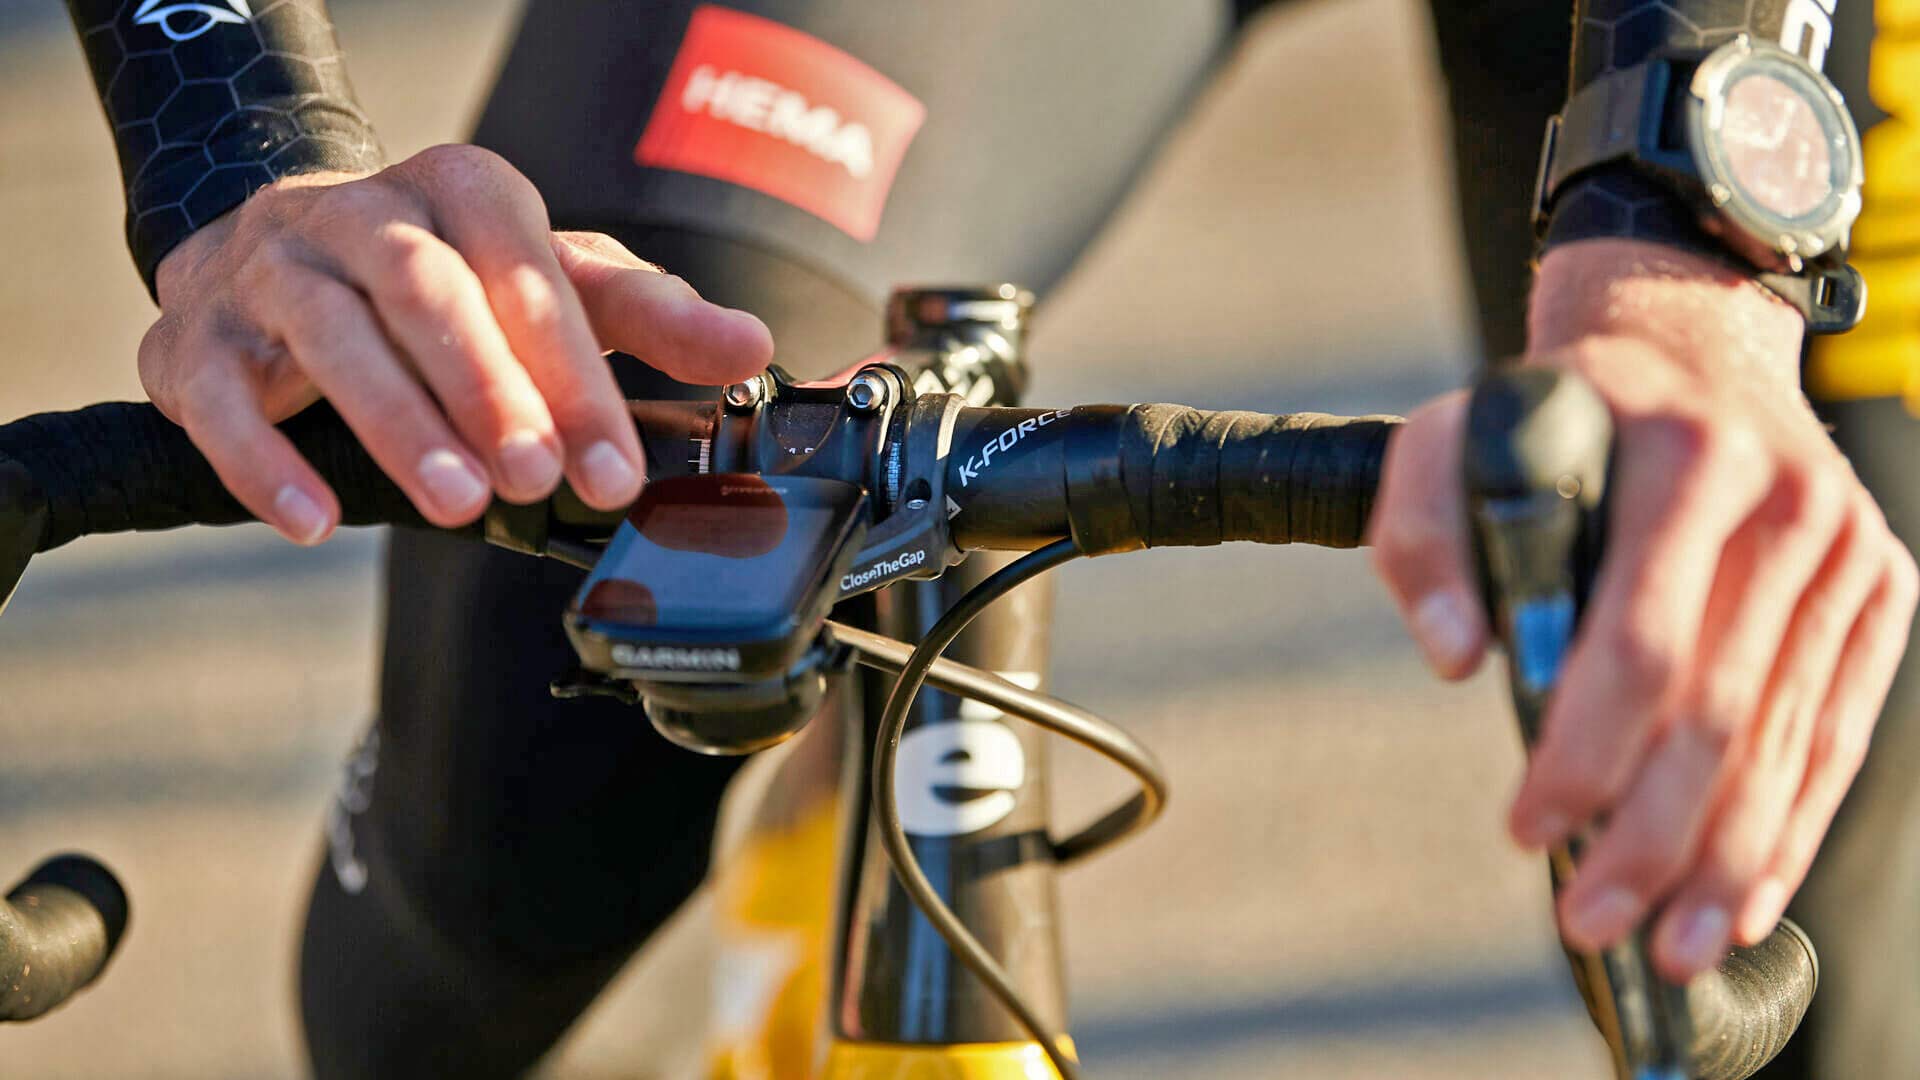 UCI Cycling governing bodies to make bike bells compulsory in 2023, Team Jumbo-Visma Close The Gap HideMyBell mounts, 